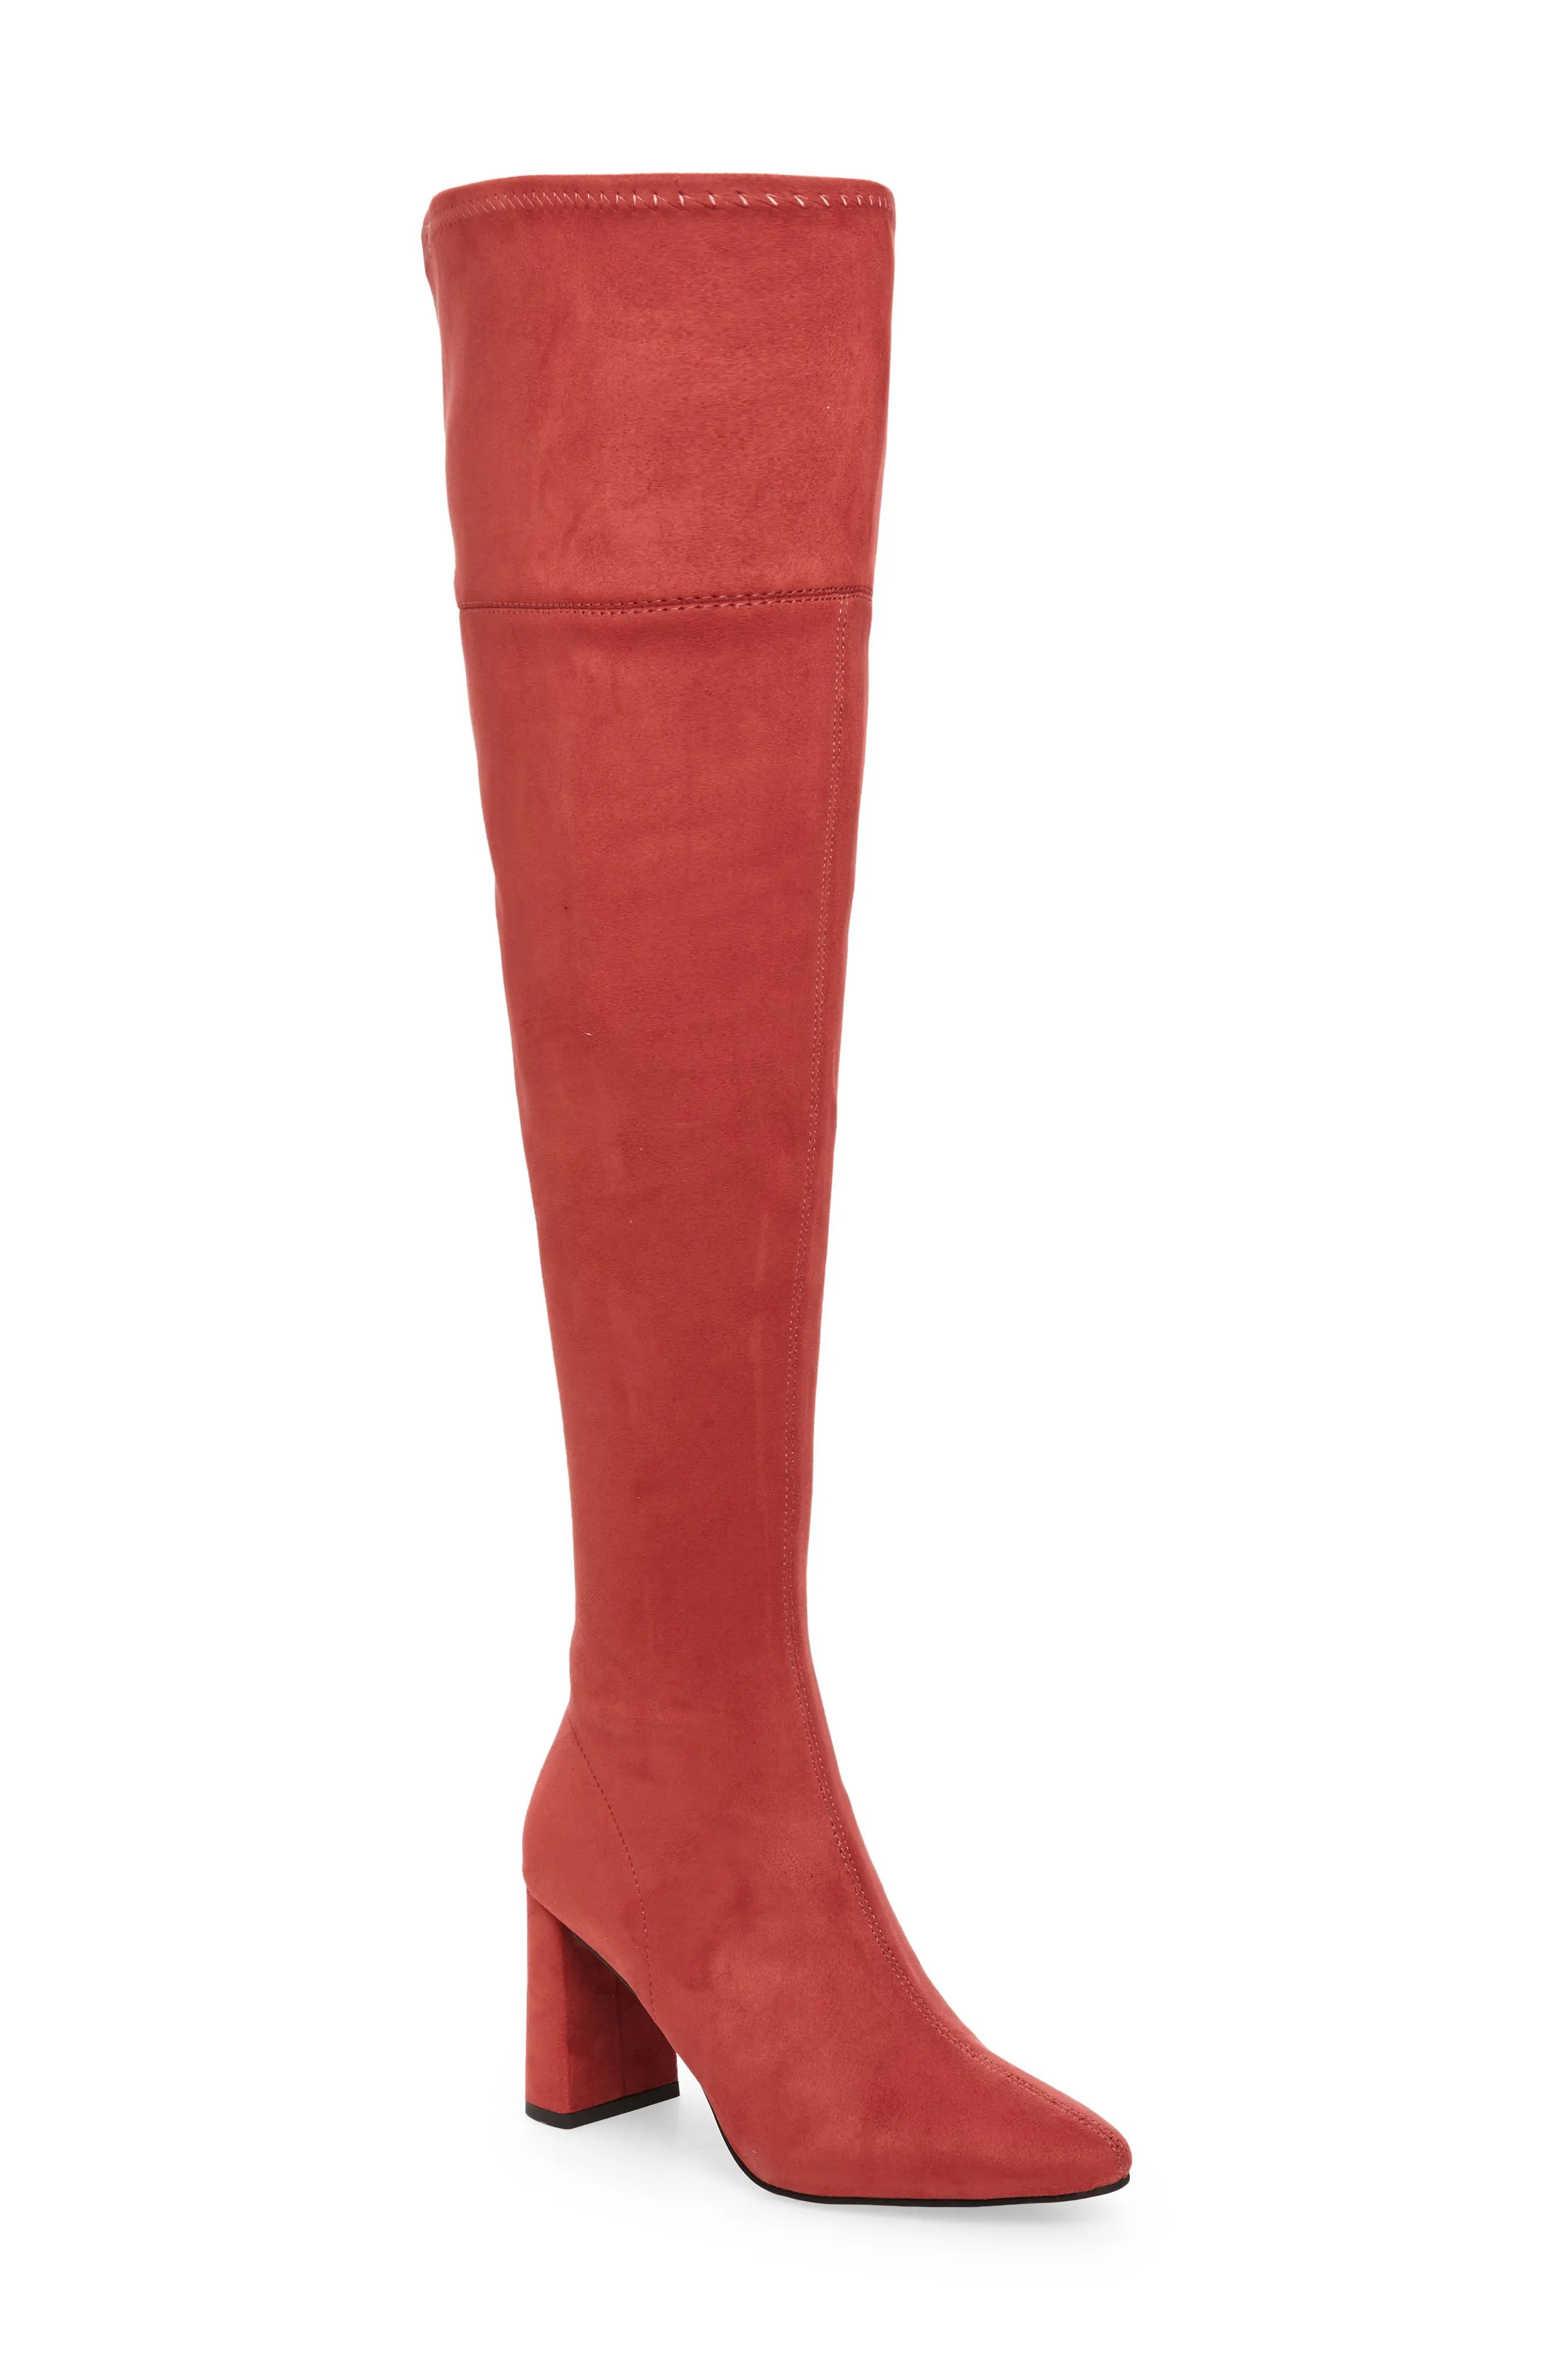 Jeffrey Campbell Parisah Over the Knee Boot, Size 8 in Bright Pink Suede at Nordstrom | Nordstrom